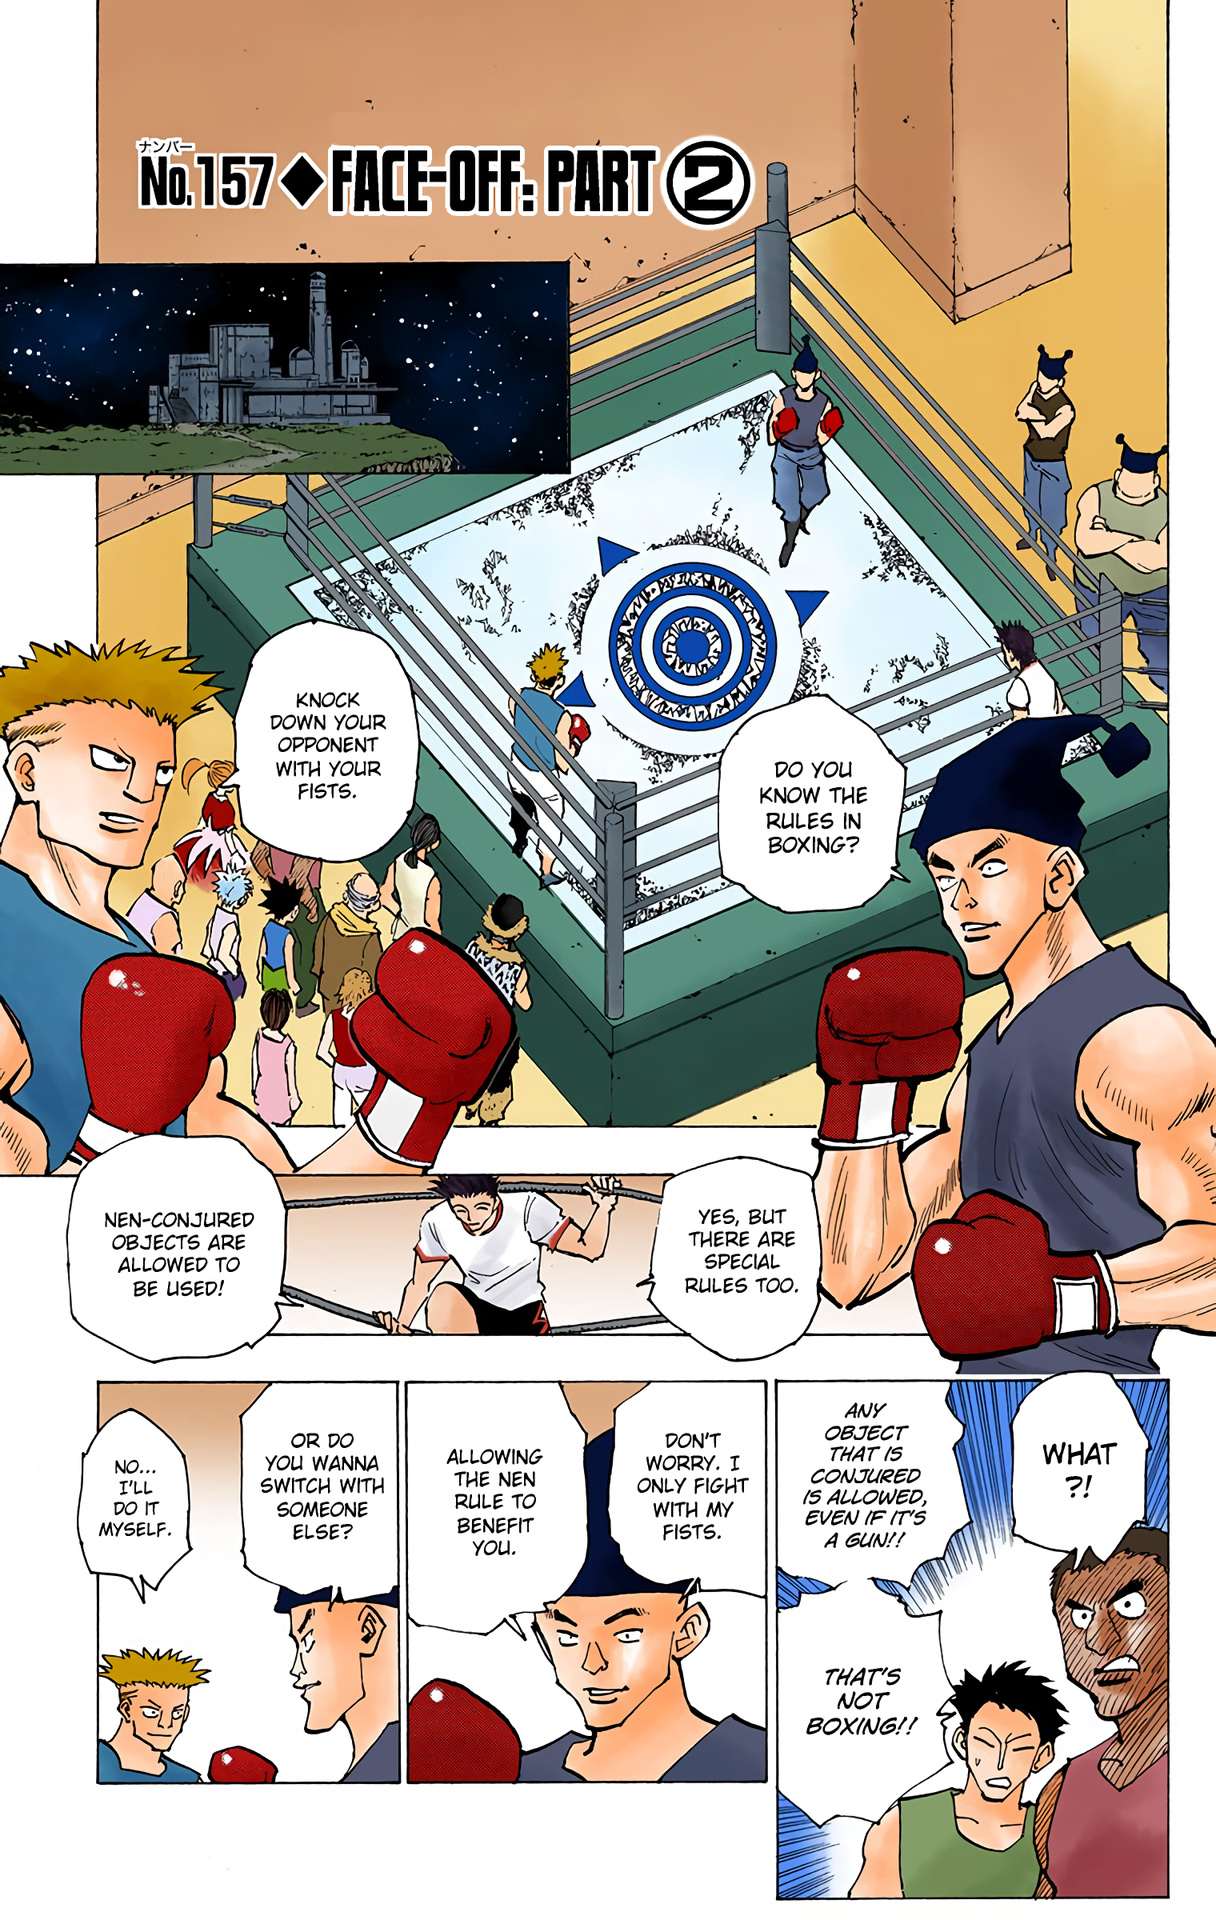 Hunter X Hunter Full Color Vol.16 Chapter 157: Face-Off: Part 2 - Picture 1